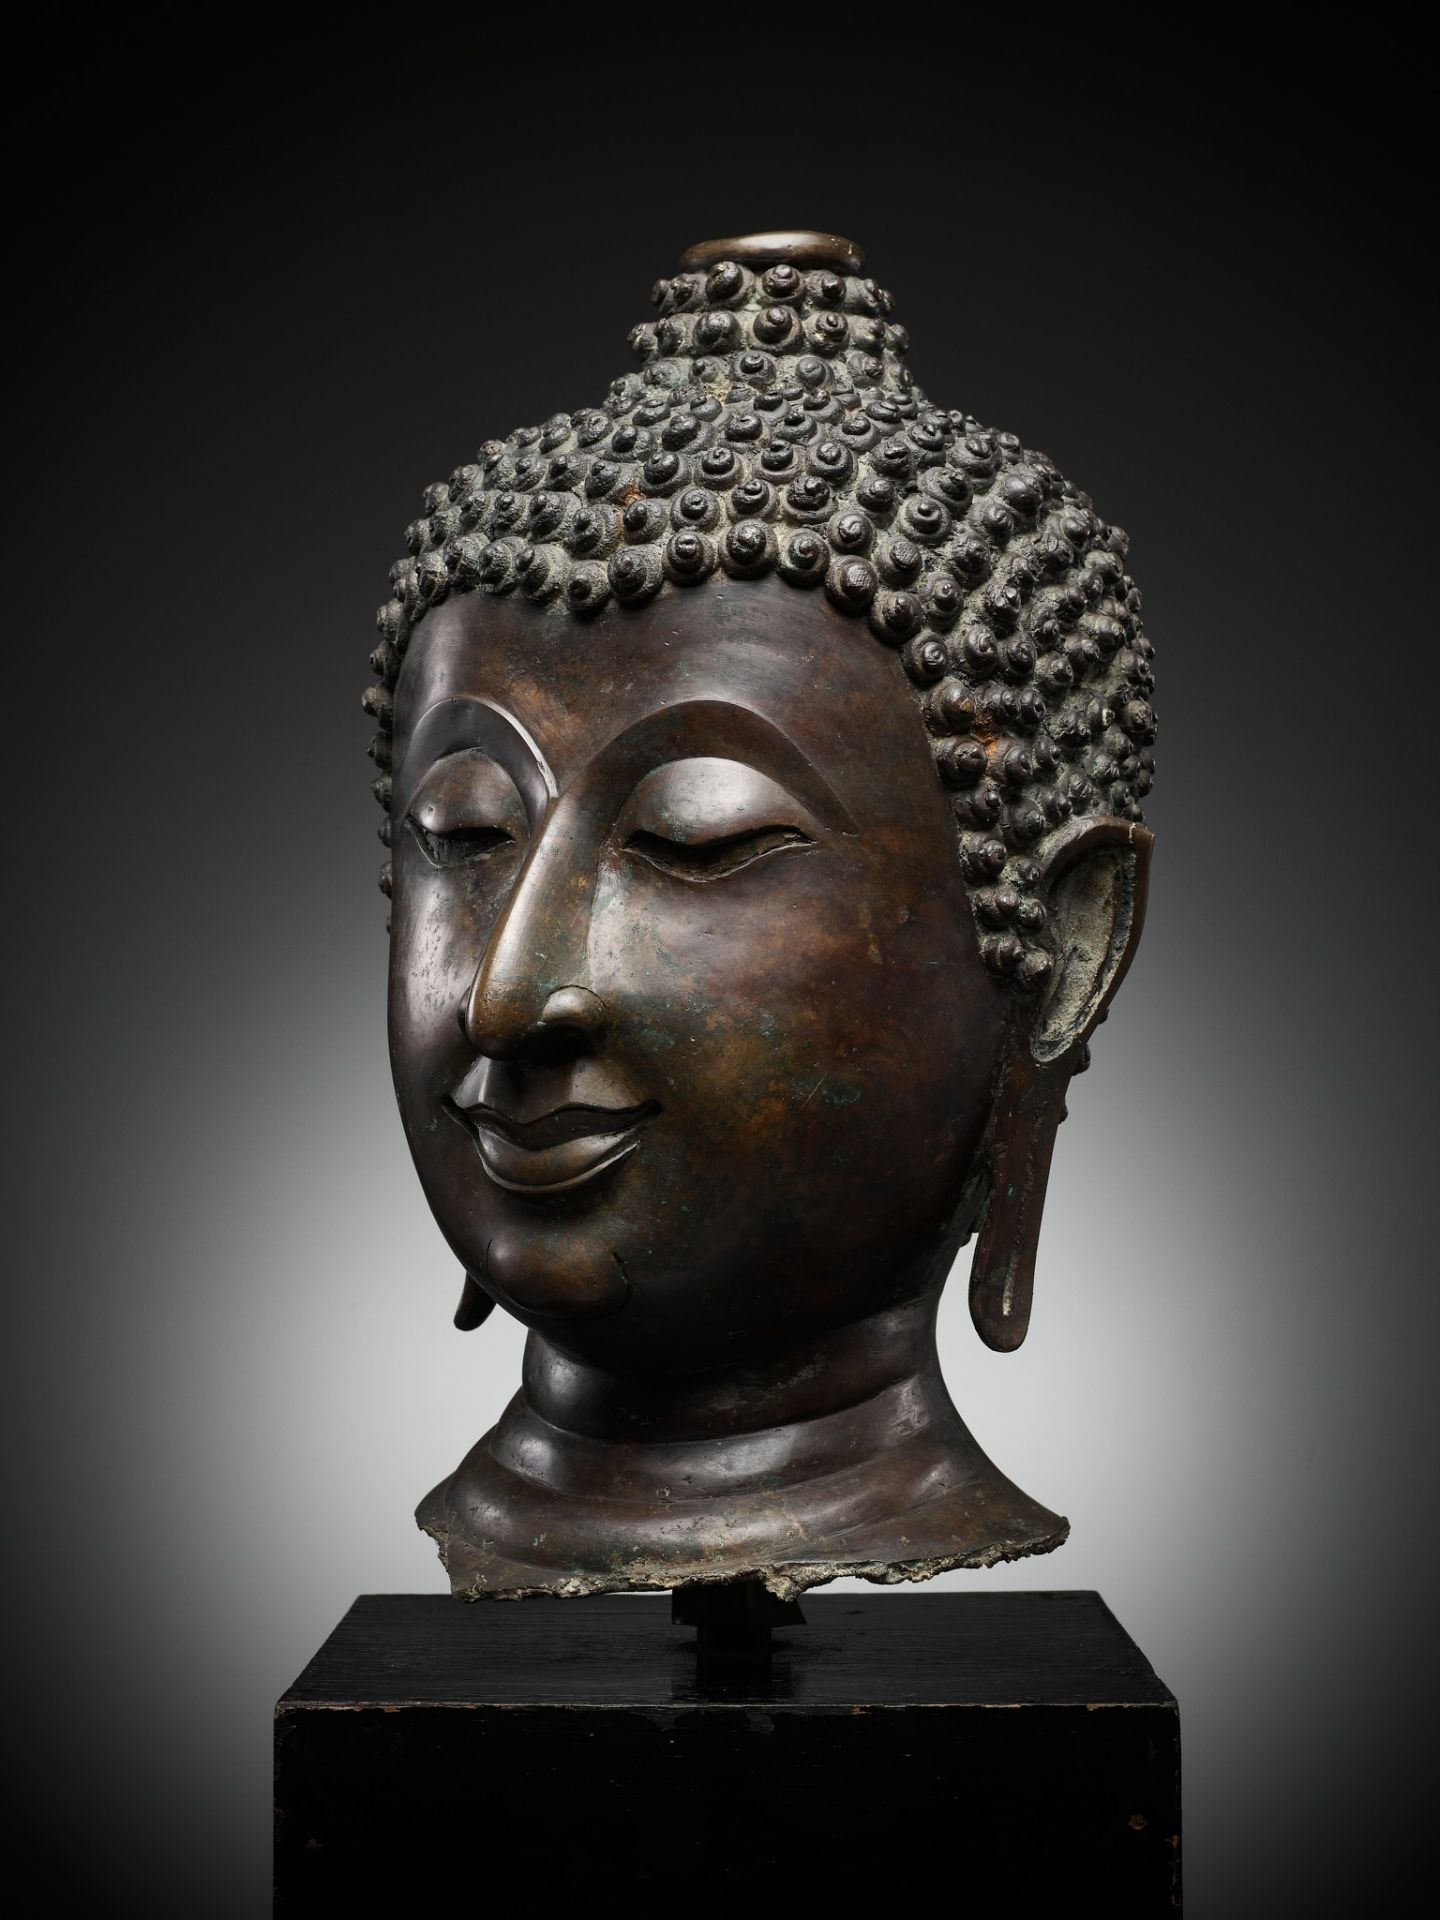 A MONUMENTAL BRONZE HEAD OF BUDDHA, LAN NA, NORTHERN THAILAND, 14TH-15th CENTURY - Image 3 of 16